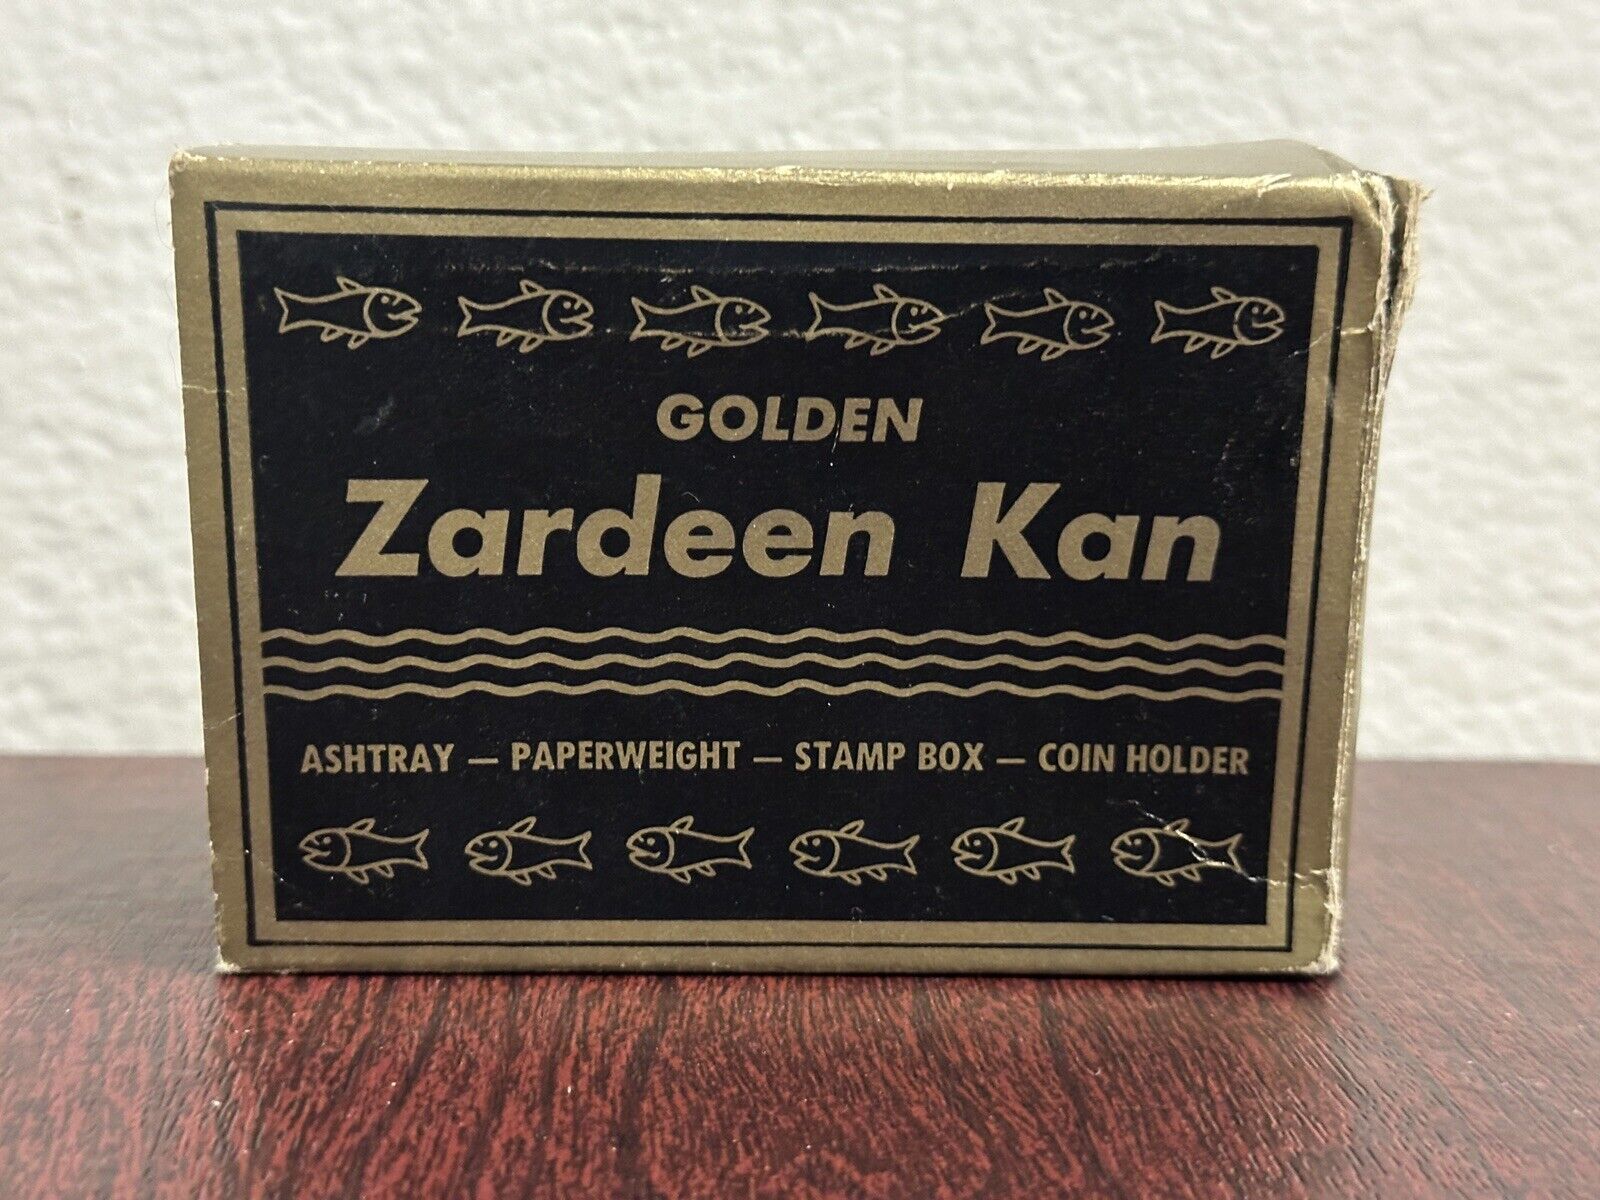 Vintage 60’s Golden Zardeen Kan Ashtray Paperweight Stamp Box Coin Holder Gold